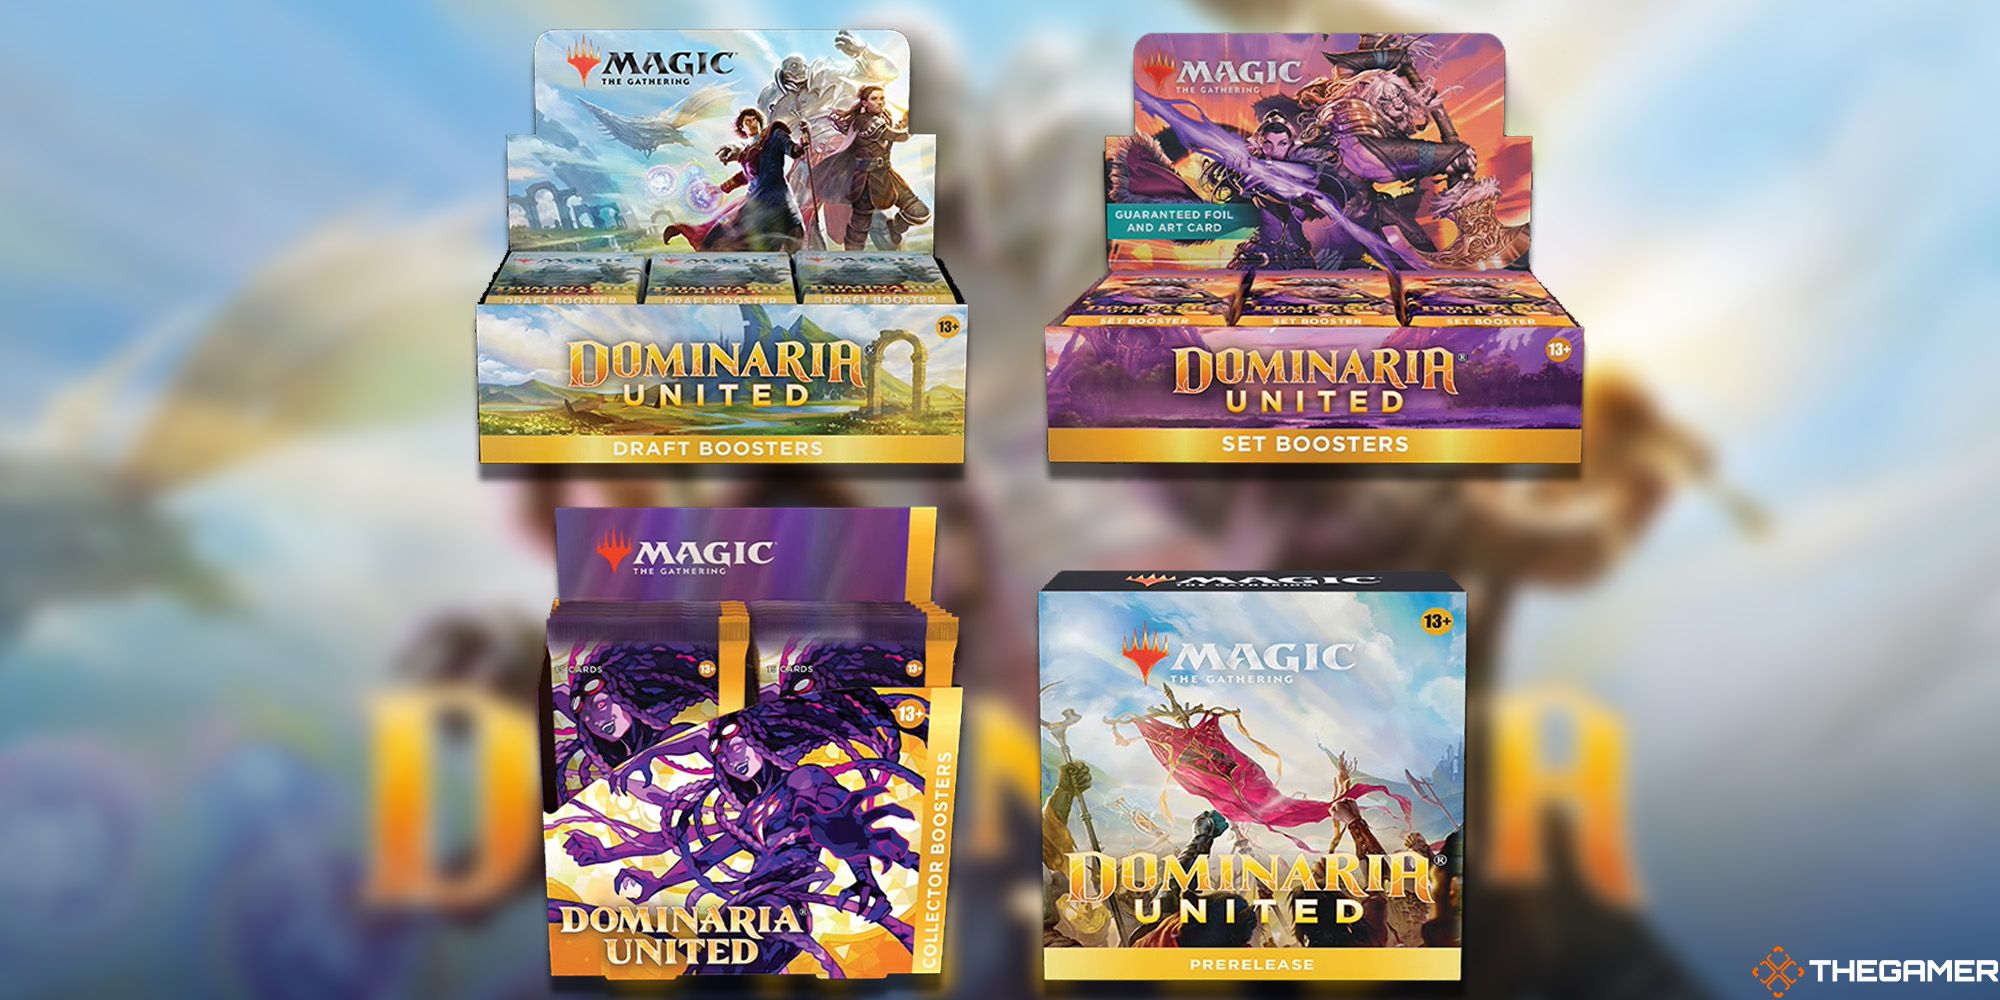 Dominaria Product Lineup